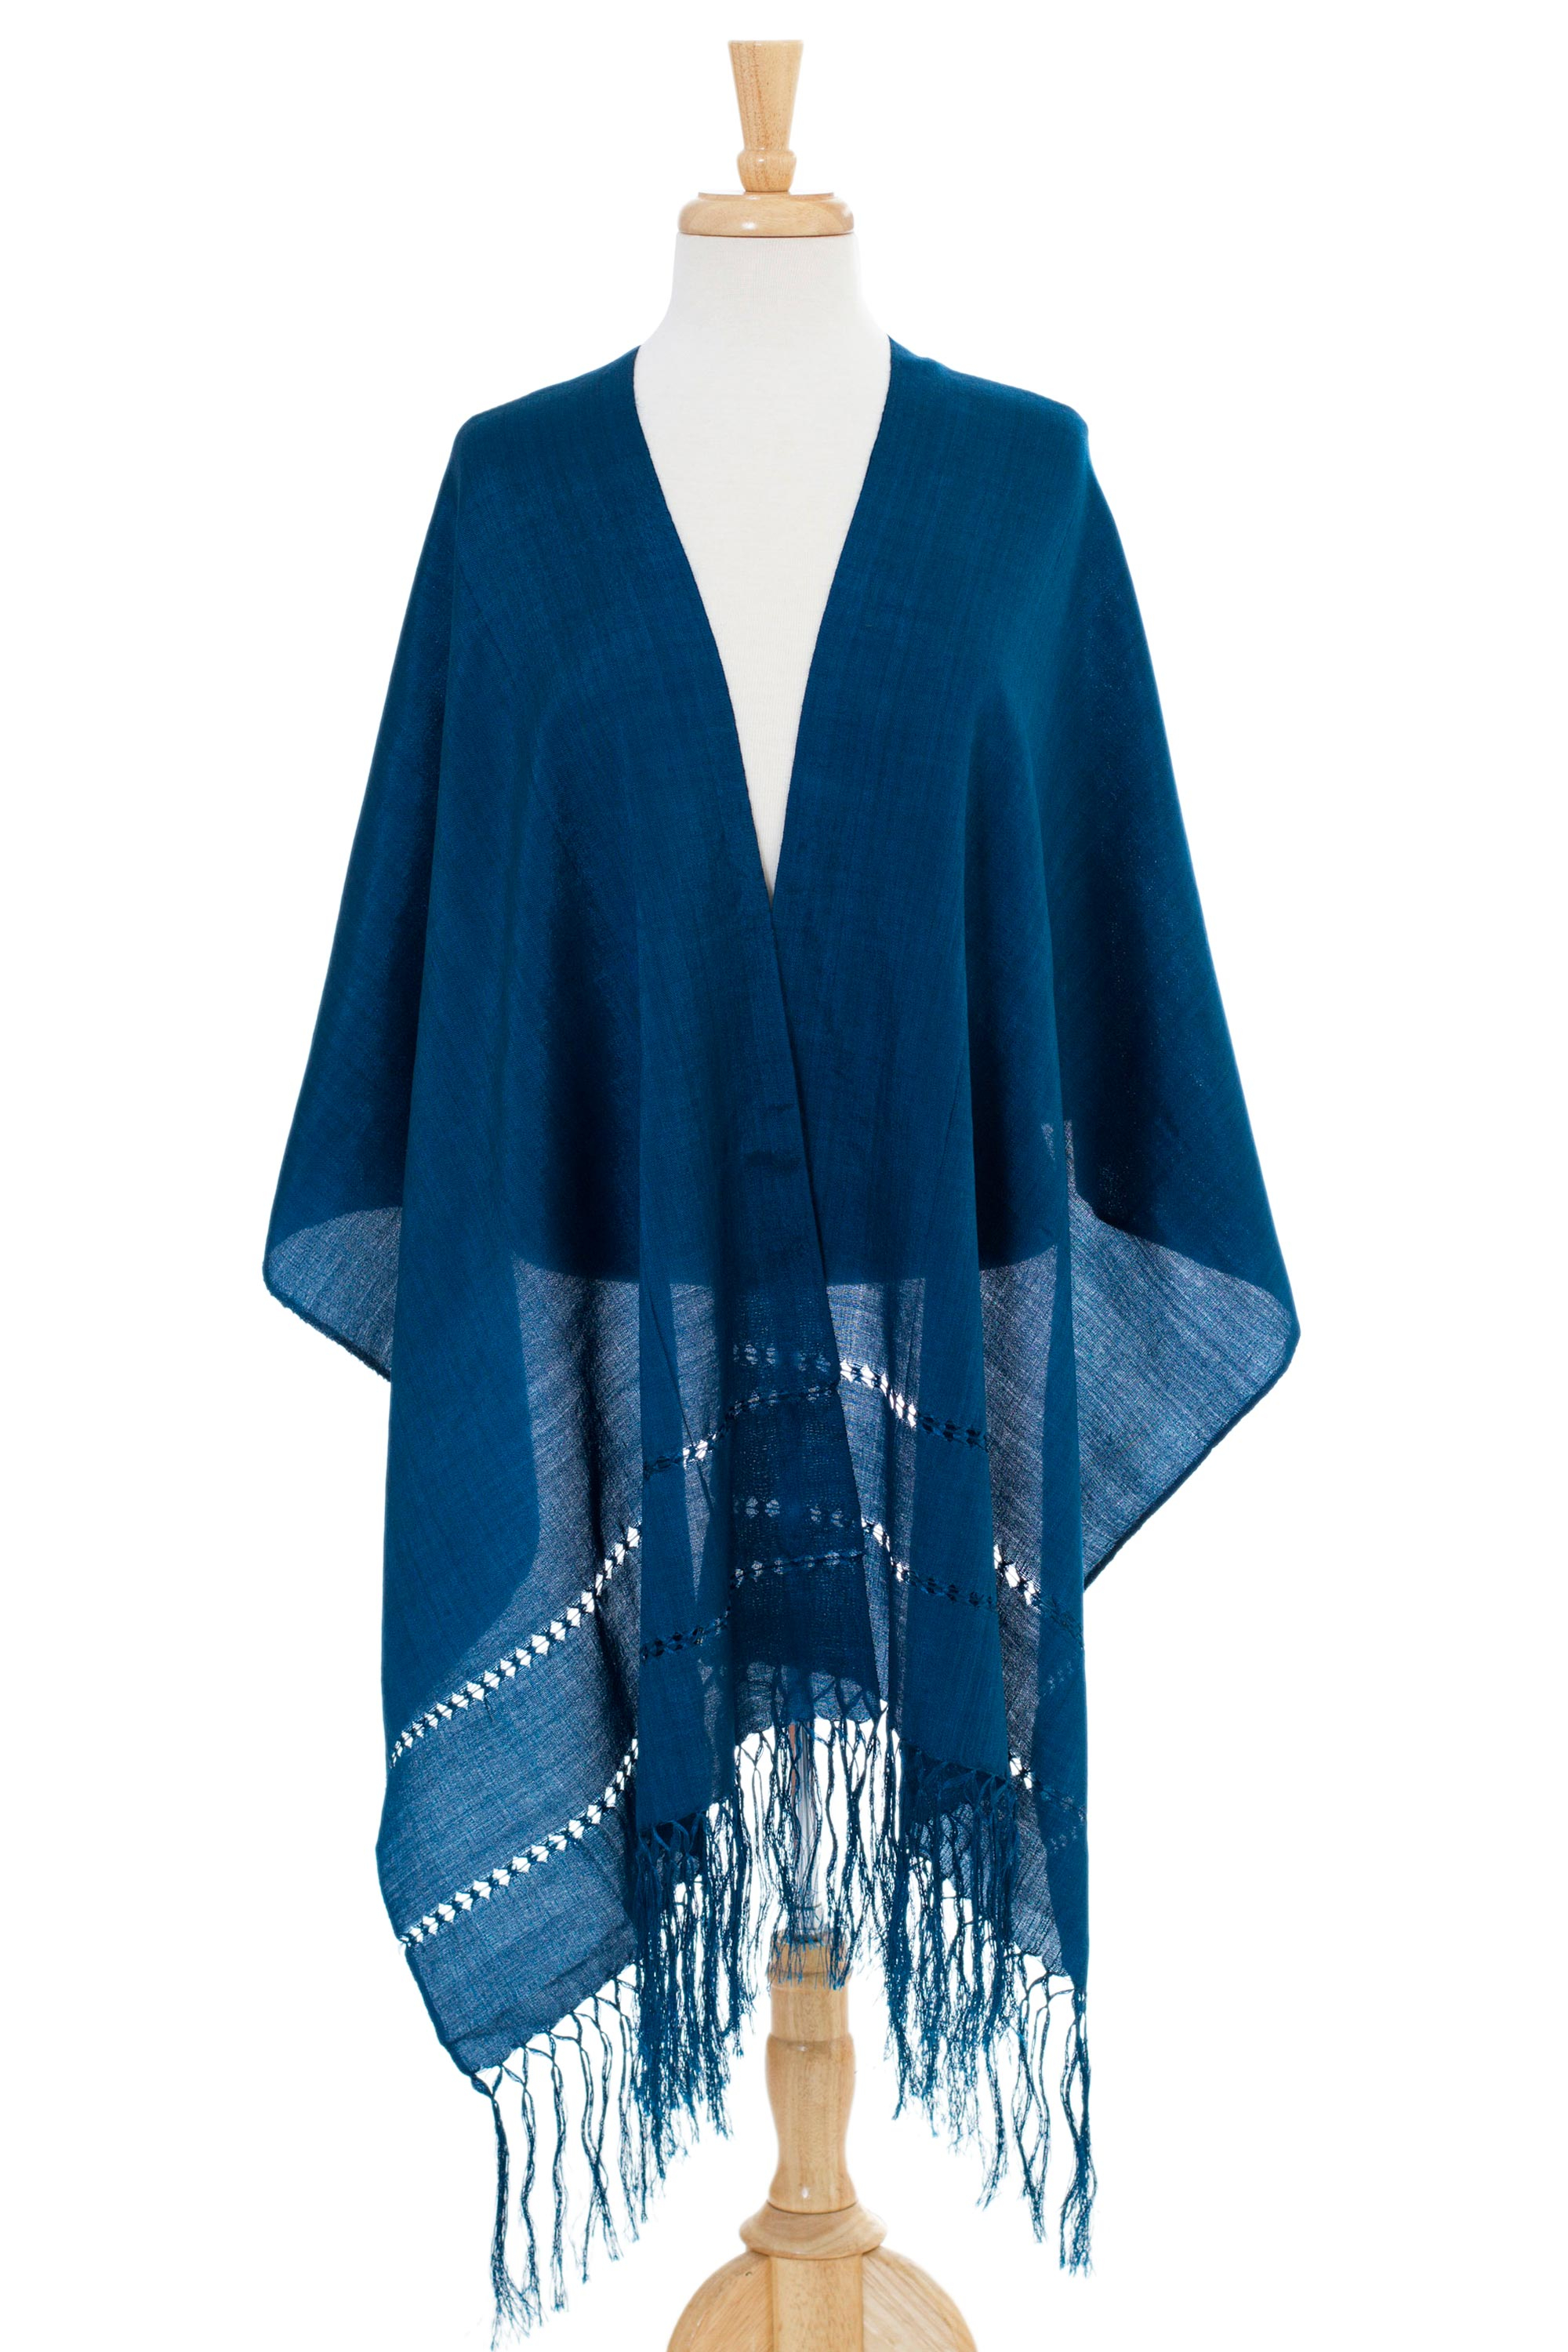 Women's Shawl in Solid Teal with Fringes from Mexico - Smooth Teal | NOVICA